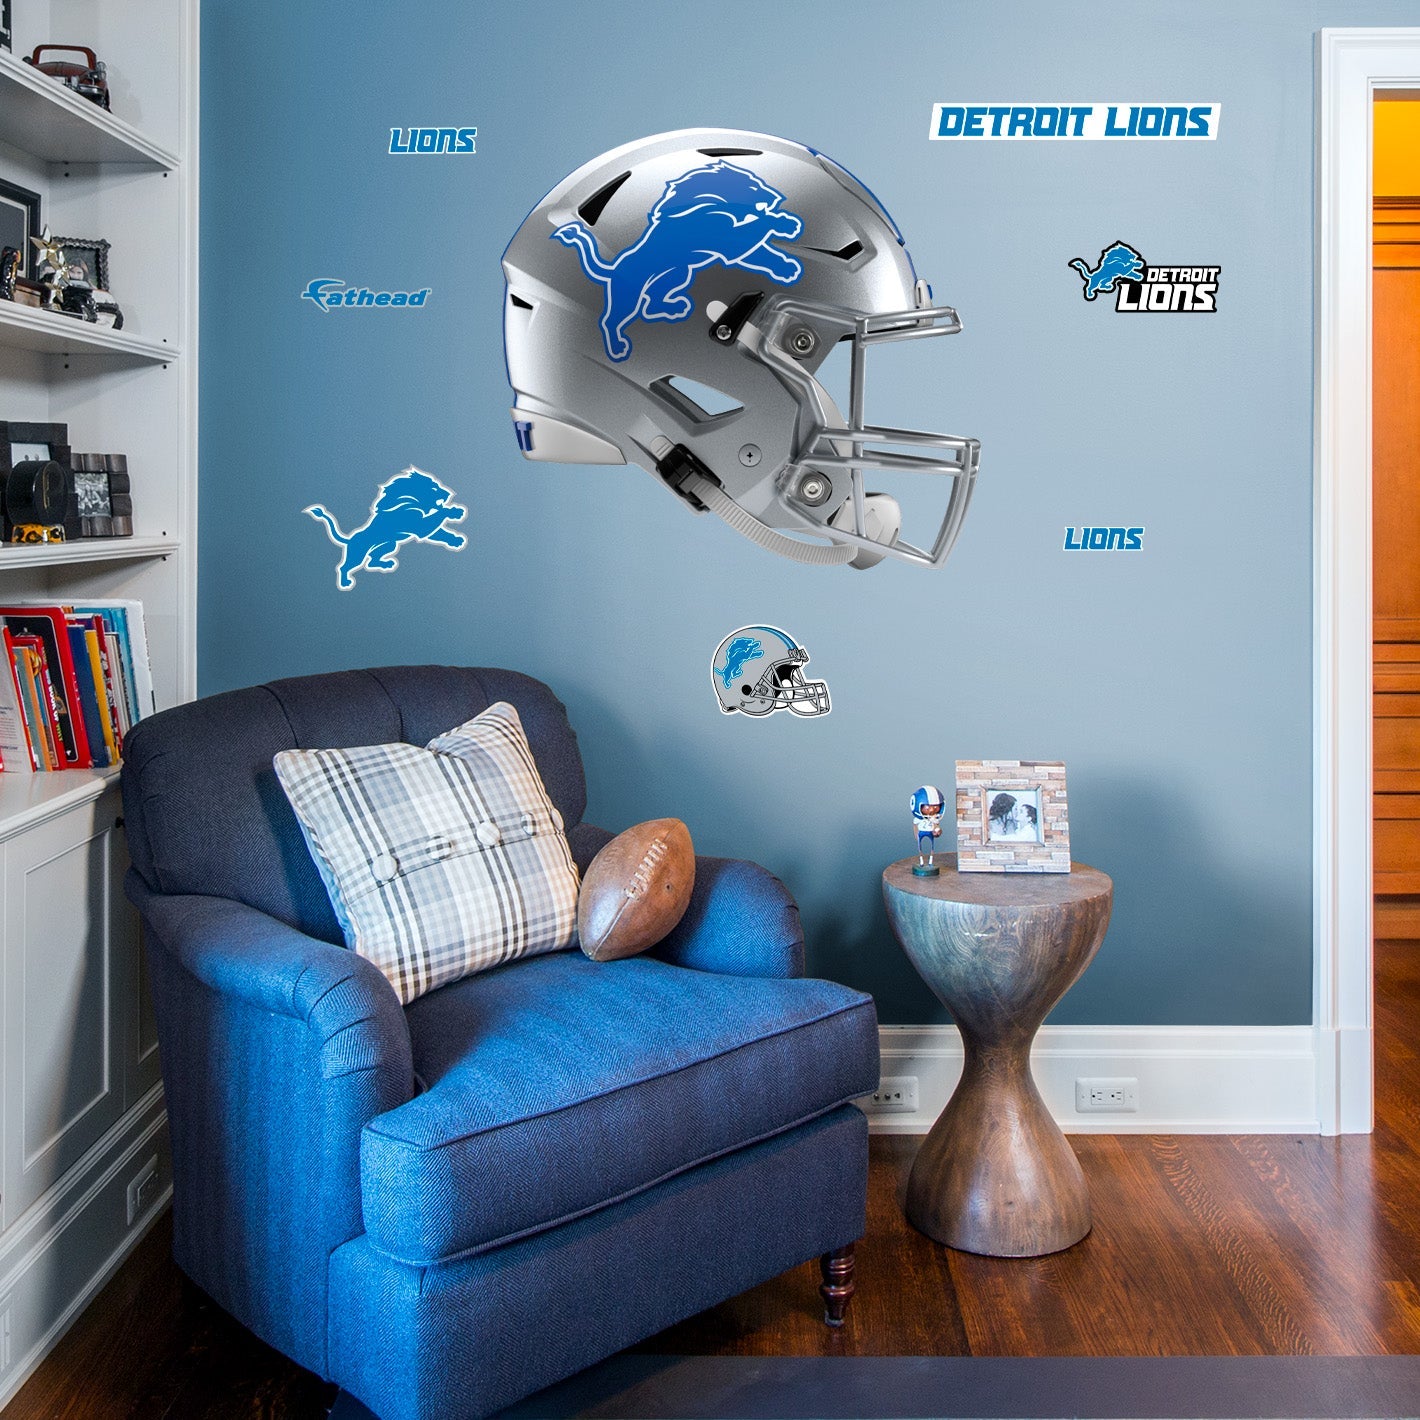 Detroit Lions: Helmet - Officially Licensed NFL Removable Adhesive Decal